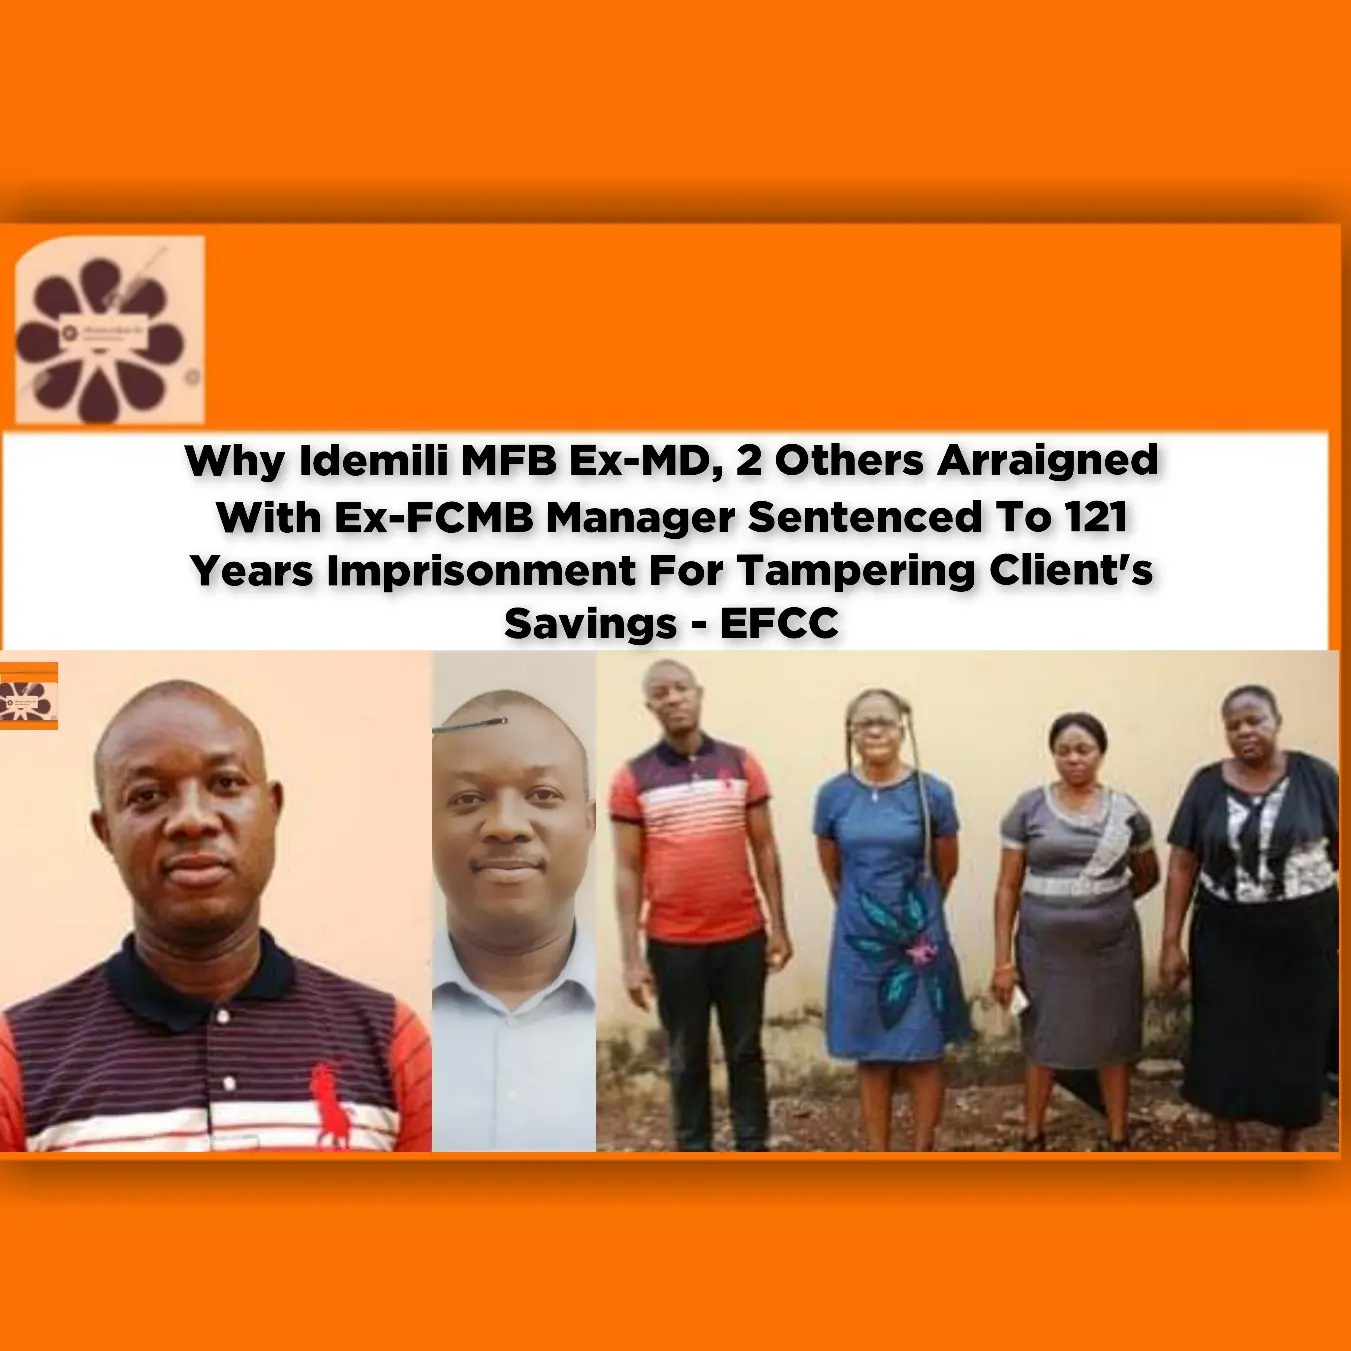 Why Idemili MFB Ex-MD, 2 Others Arraigned With Ex-FCMB Manager Sentenced To 121 Years Imprisonment For Tampering Client's Savings - EFCC ~ OsazuwaAkonedo #Omirhobo